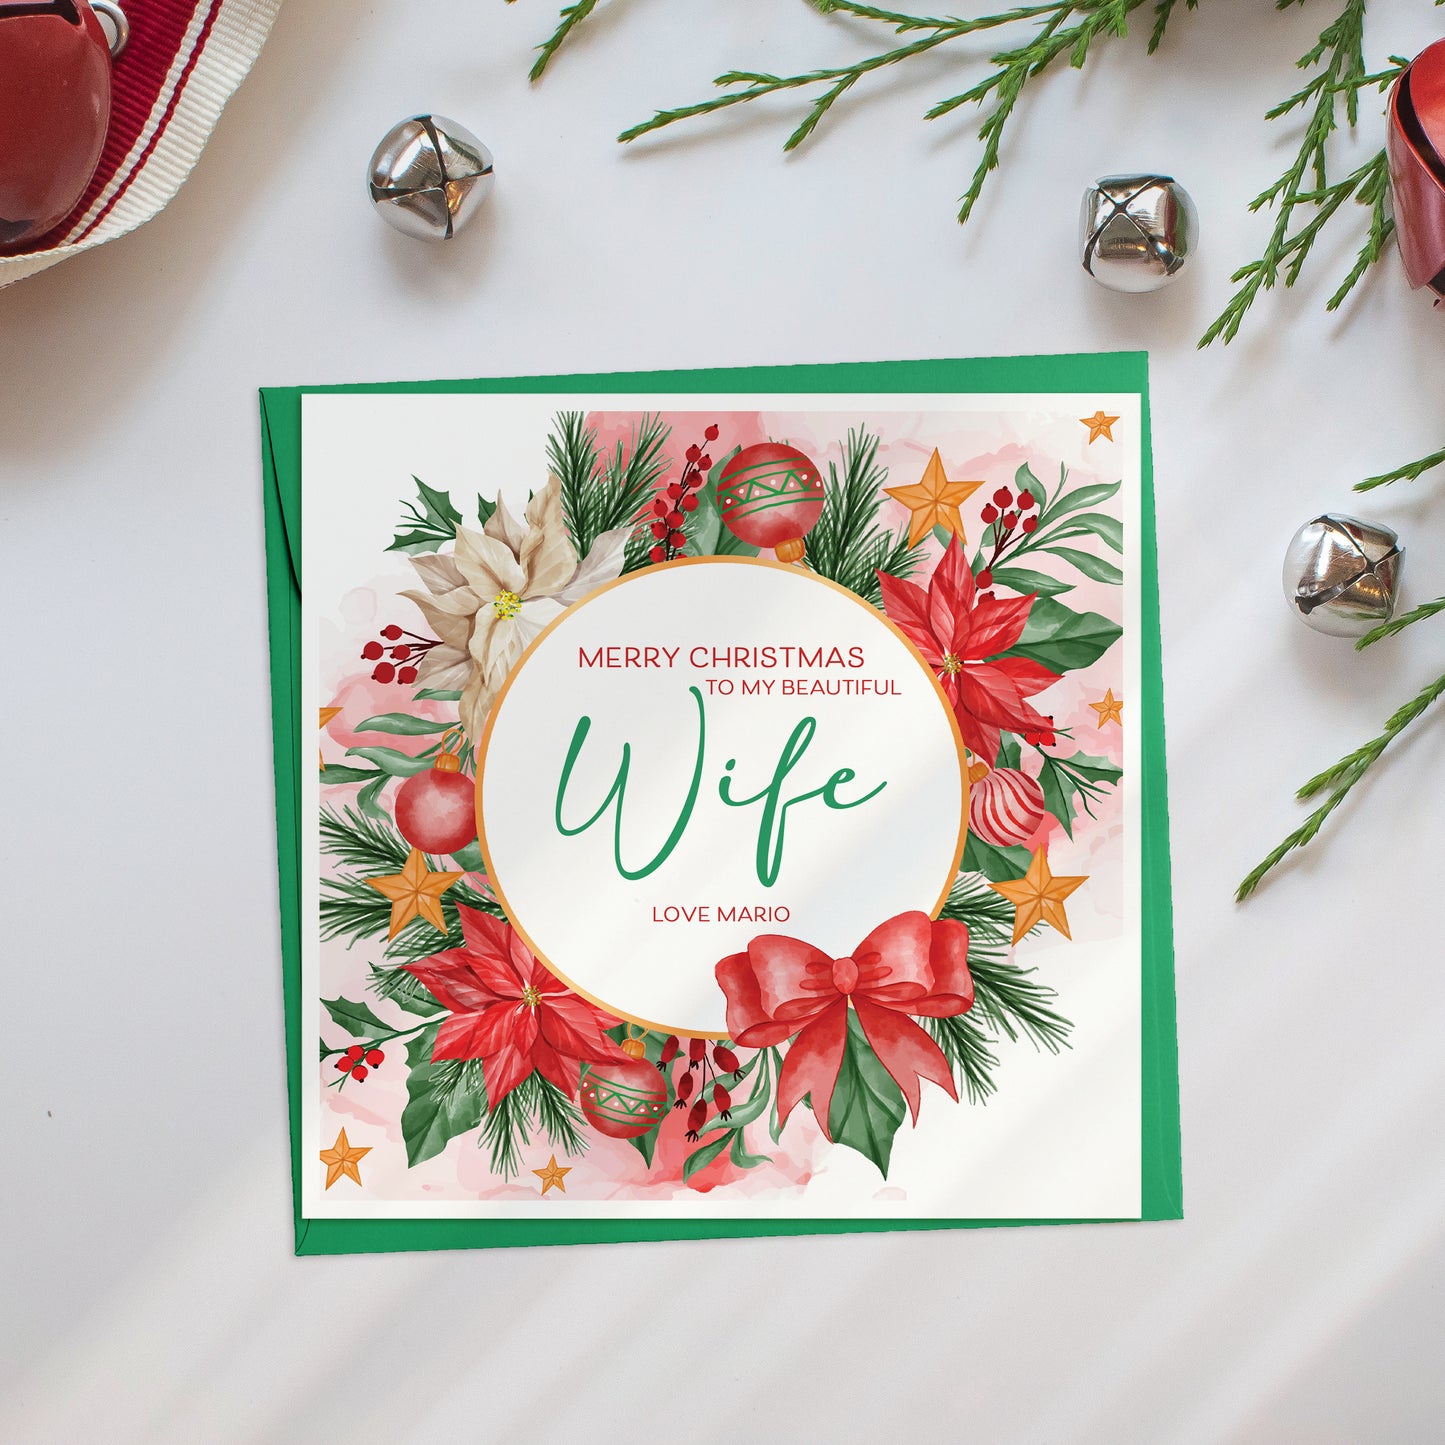 To my wife at Christmas Poinsettia Card